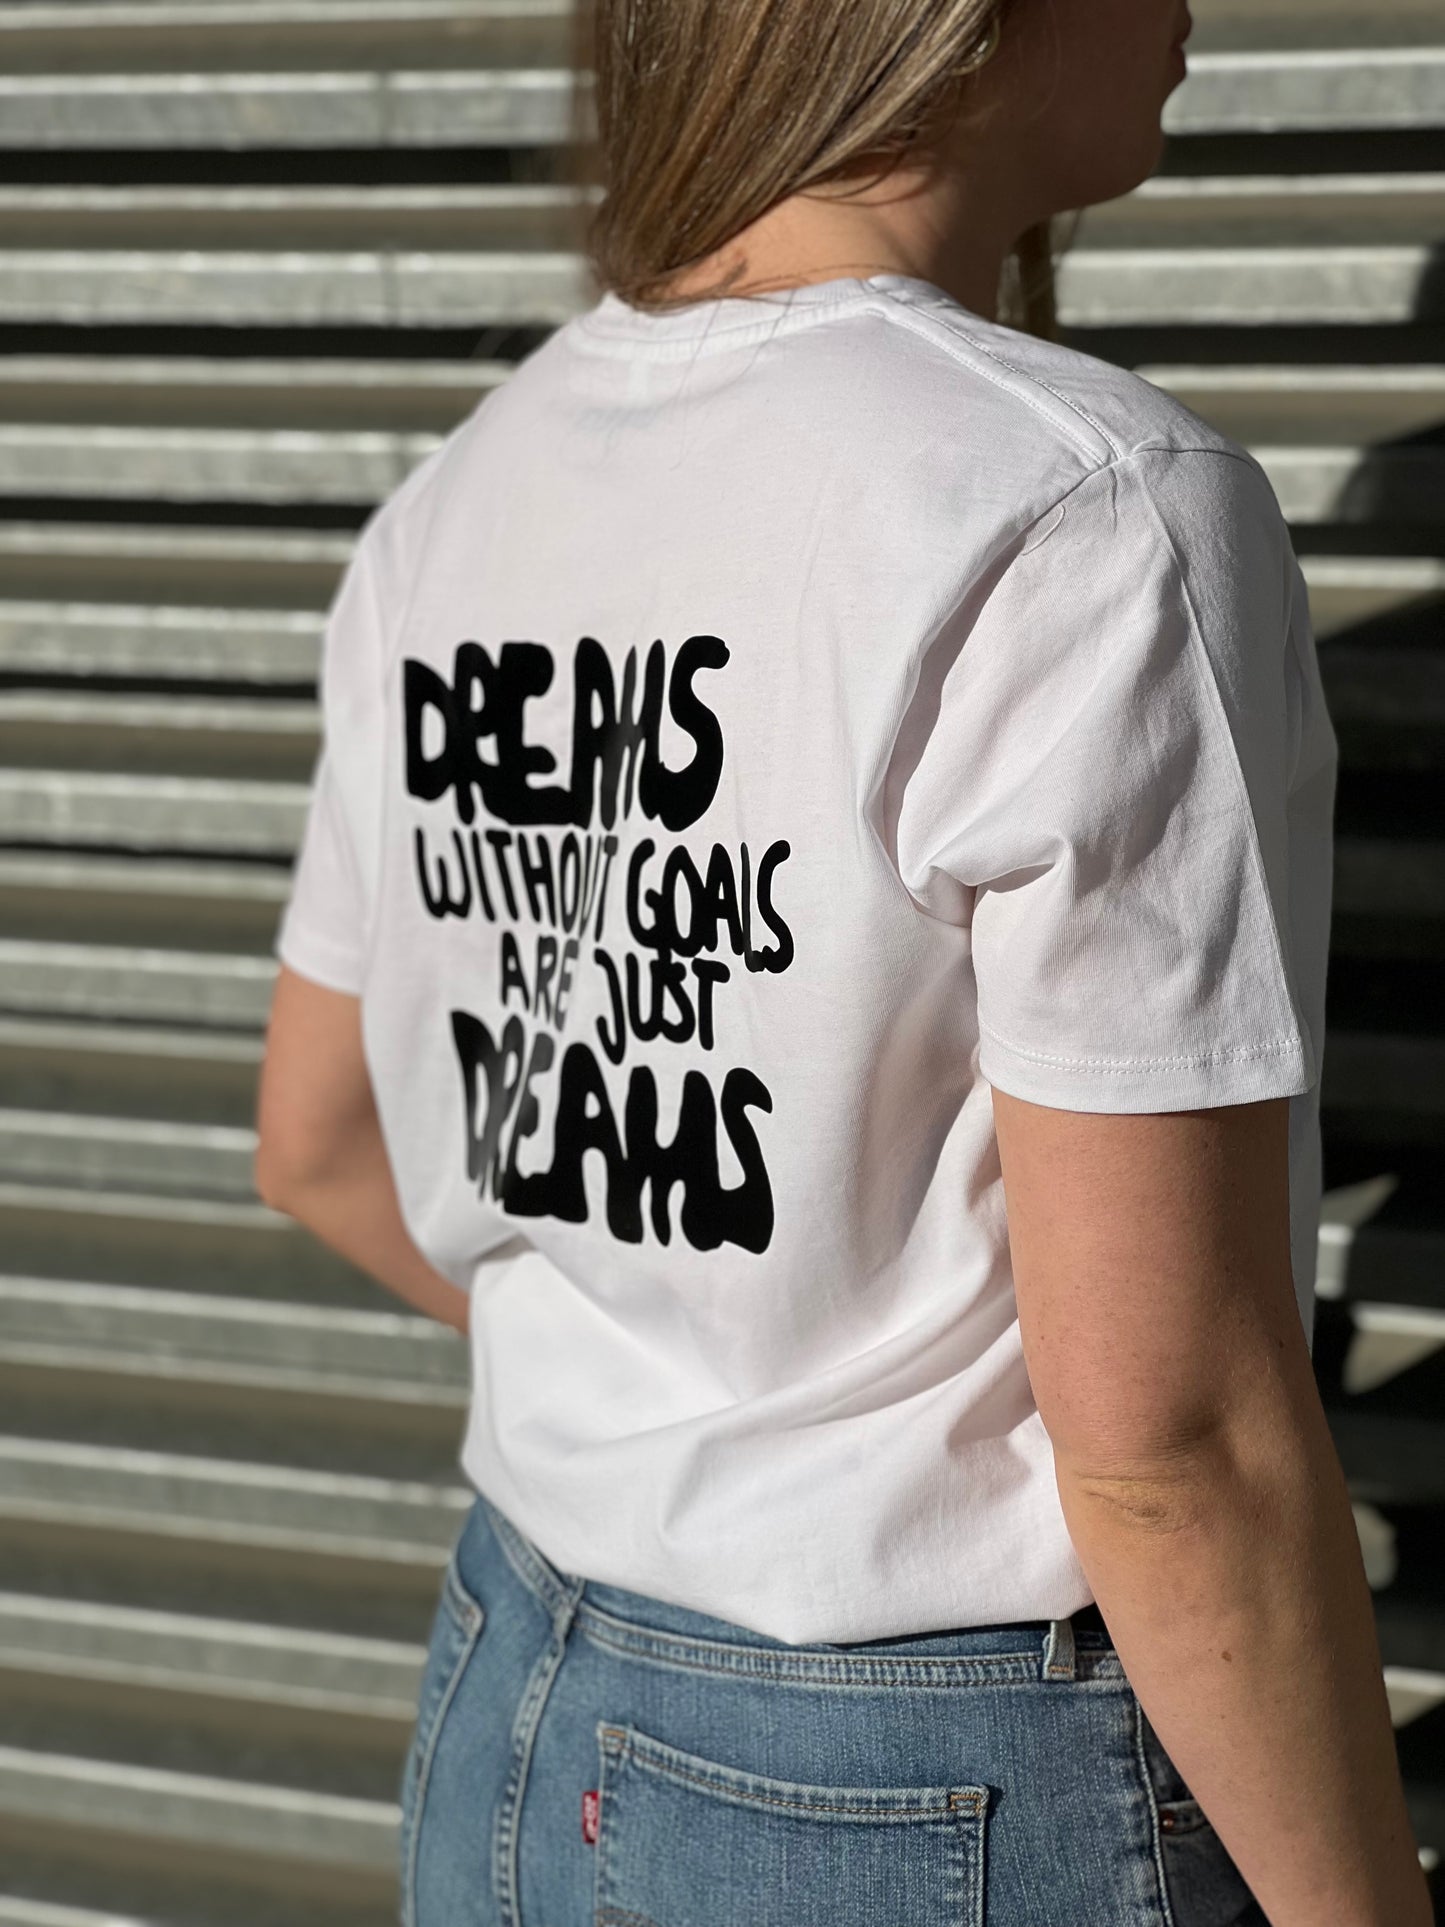 Motivational T-Shirt: Dreams without goals are just dreams